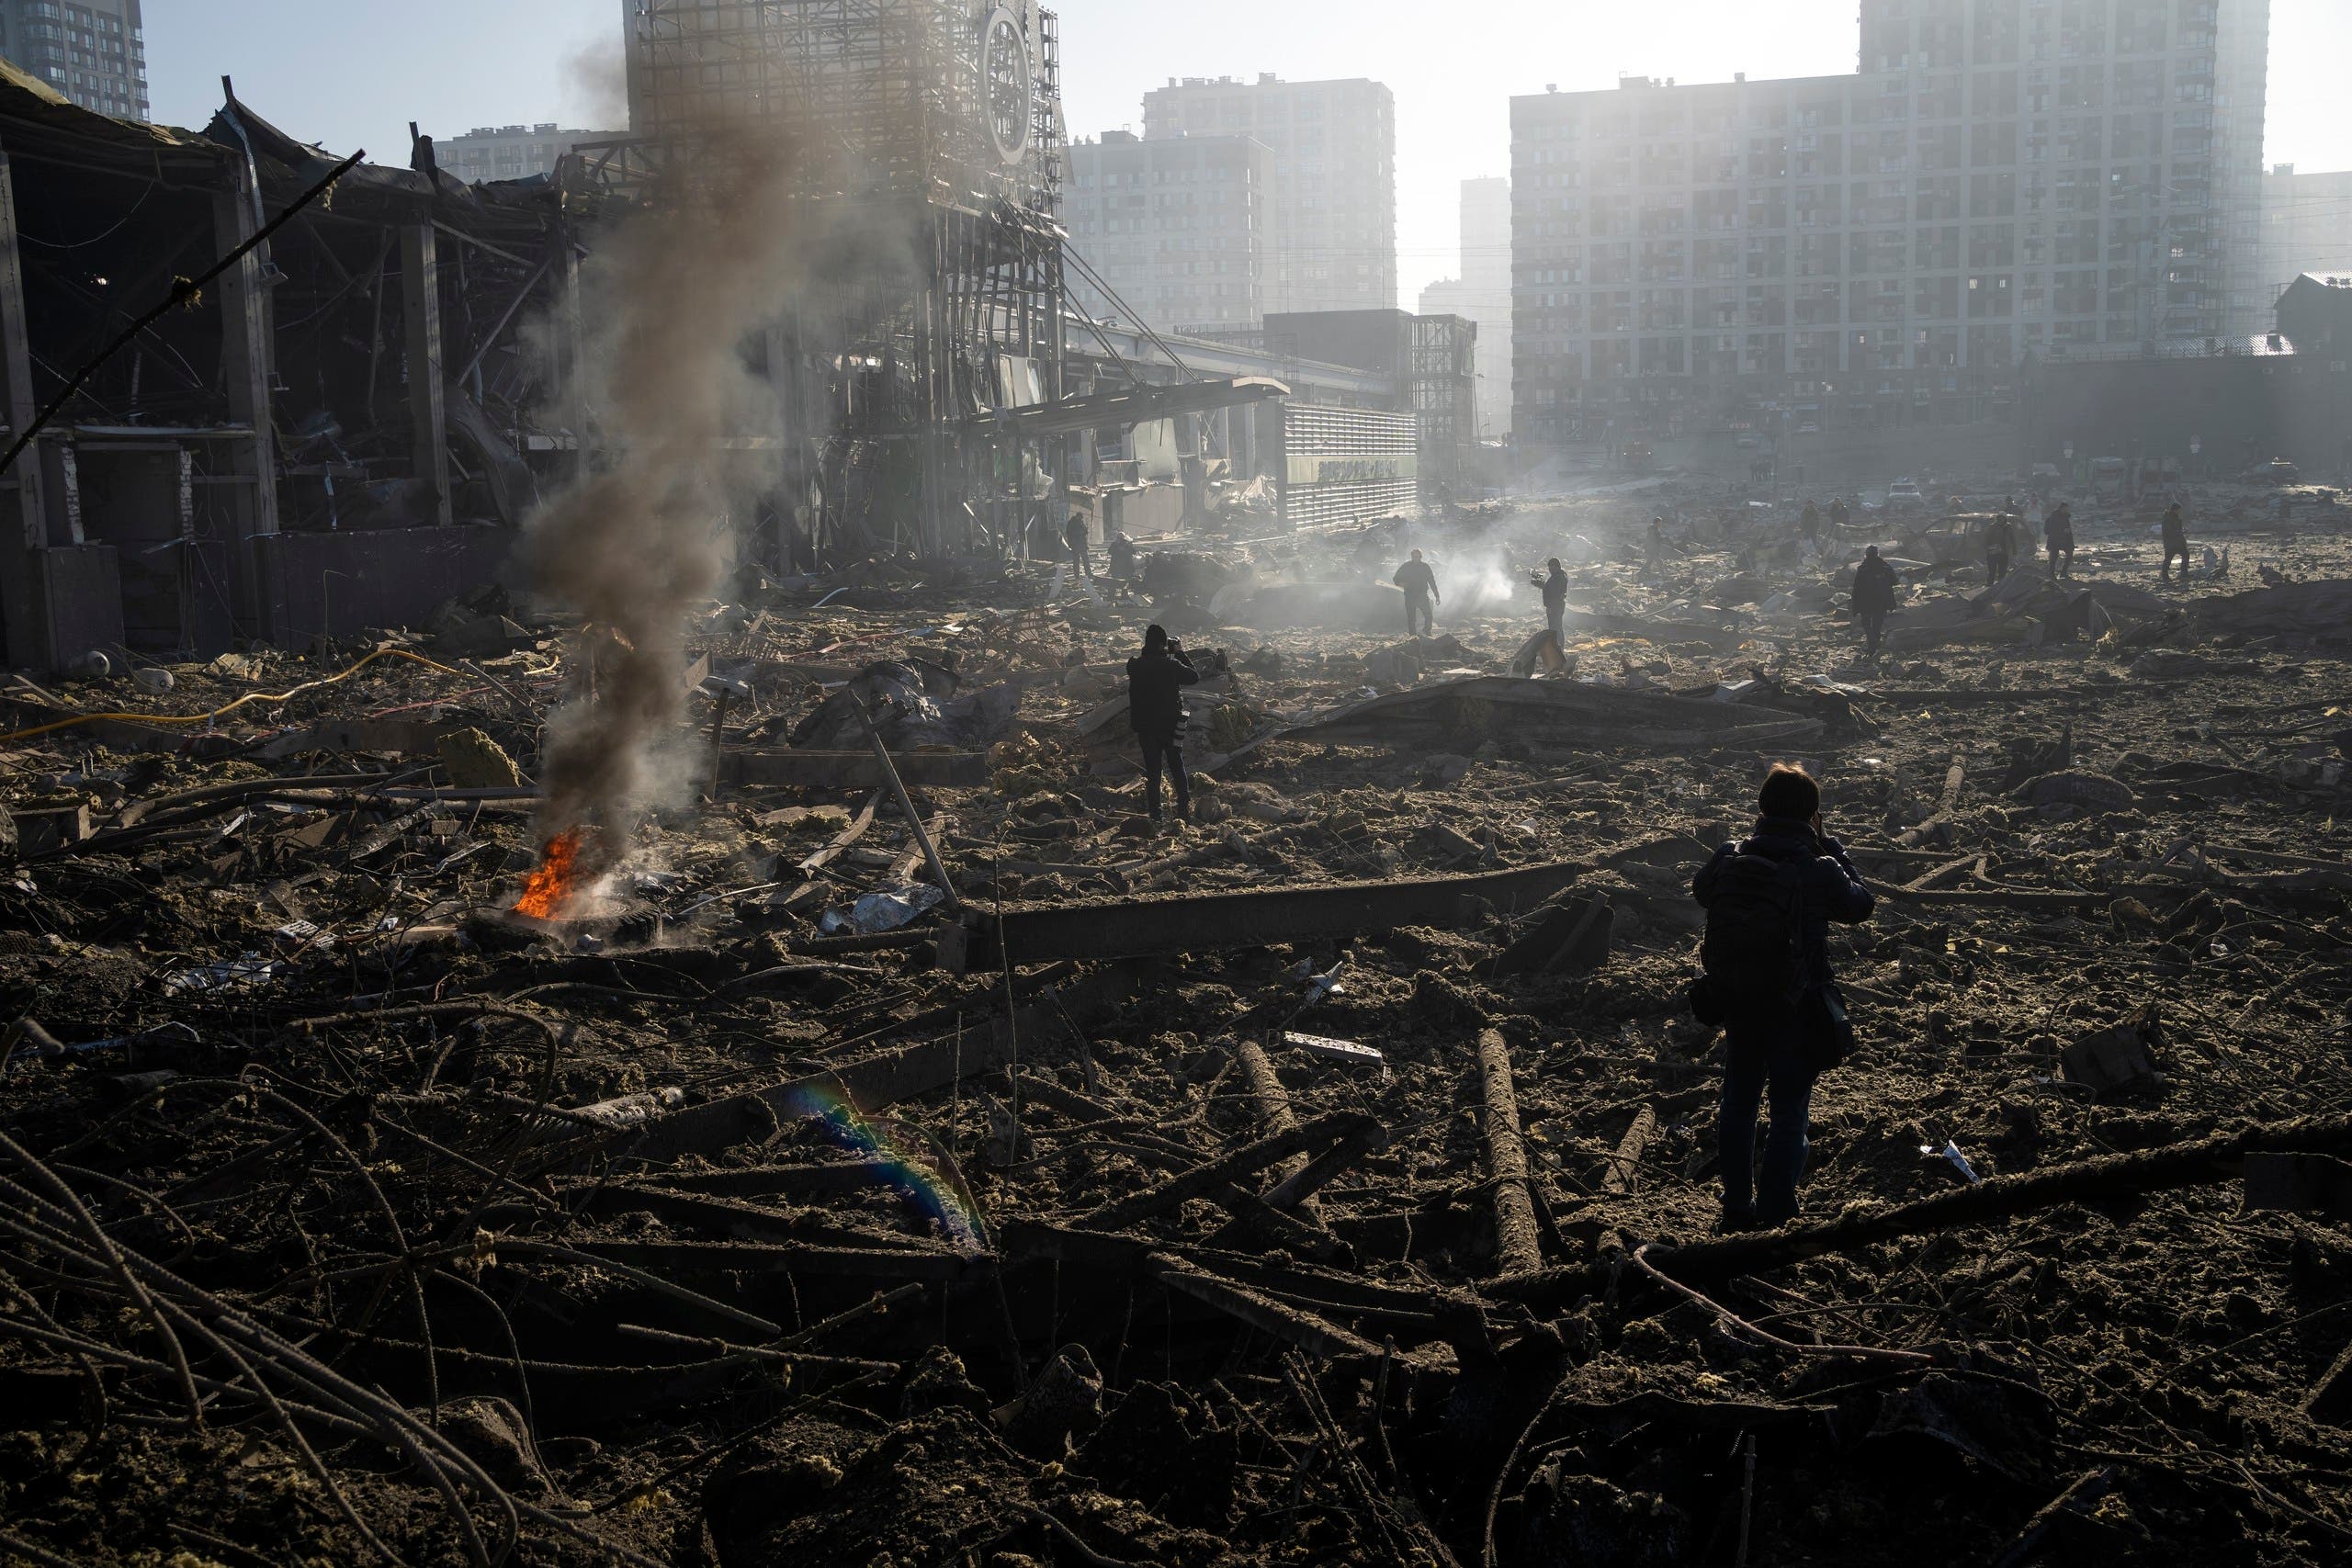 A destroyed shopping center in Kyiv after the fighting